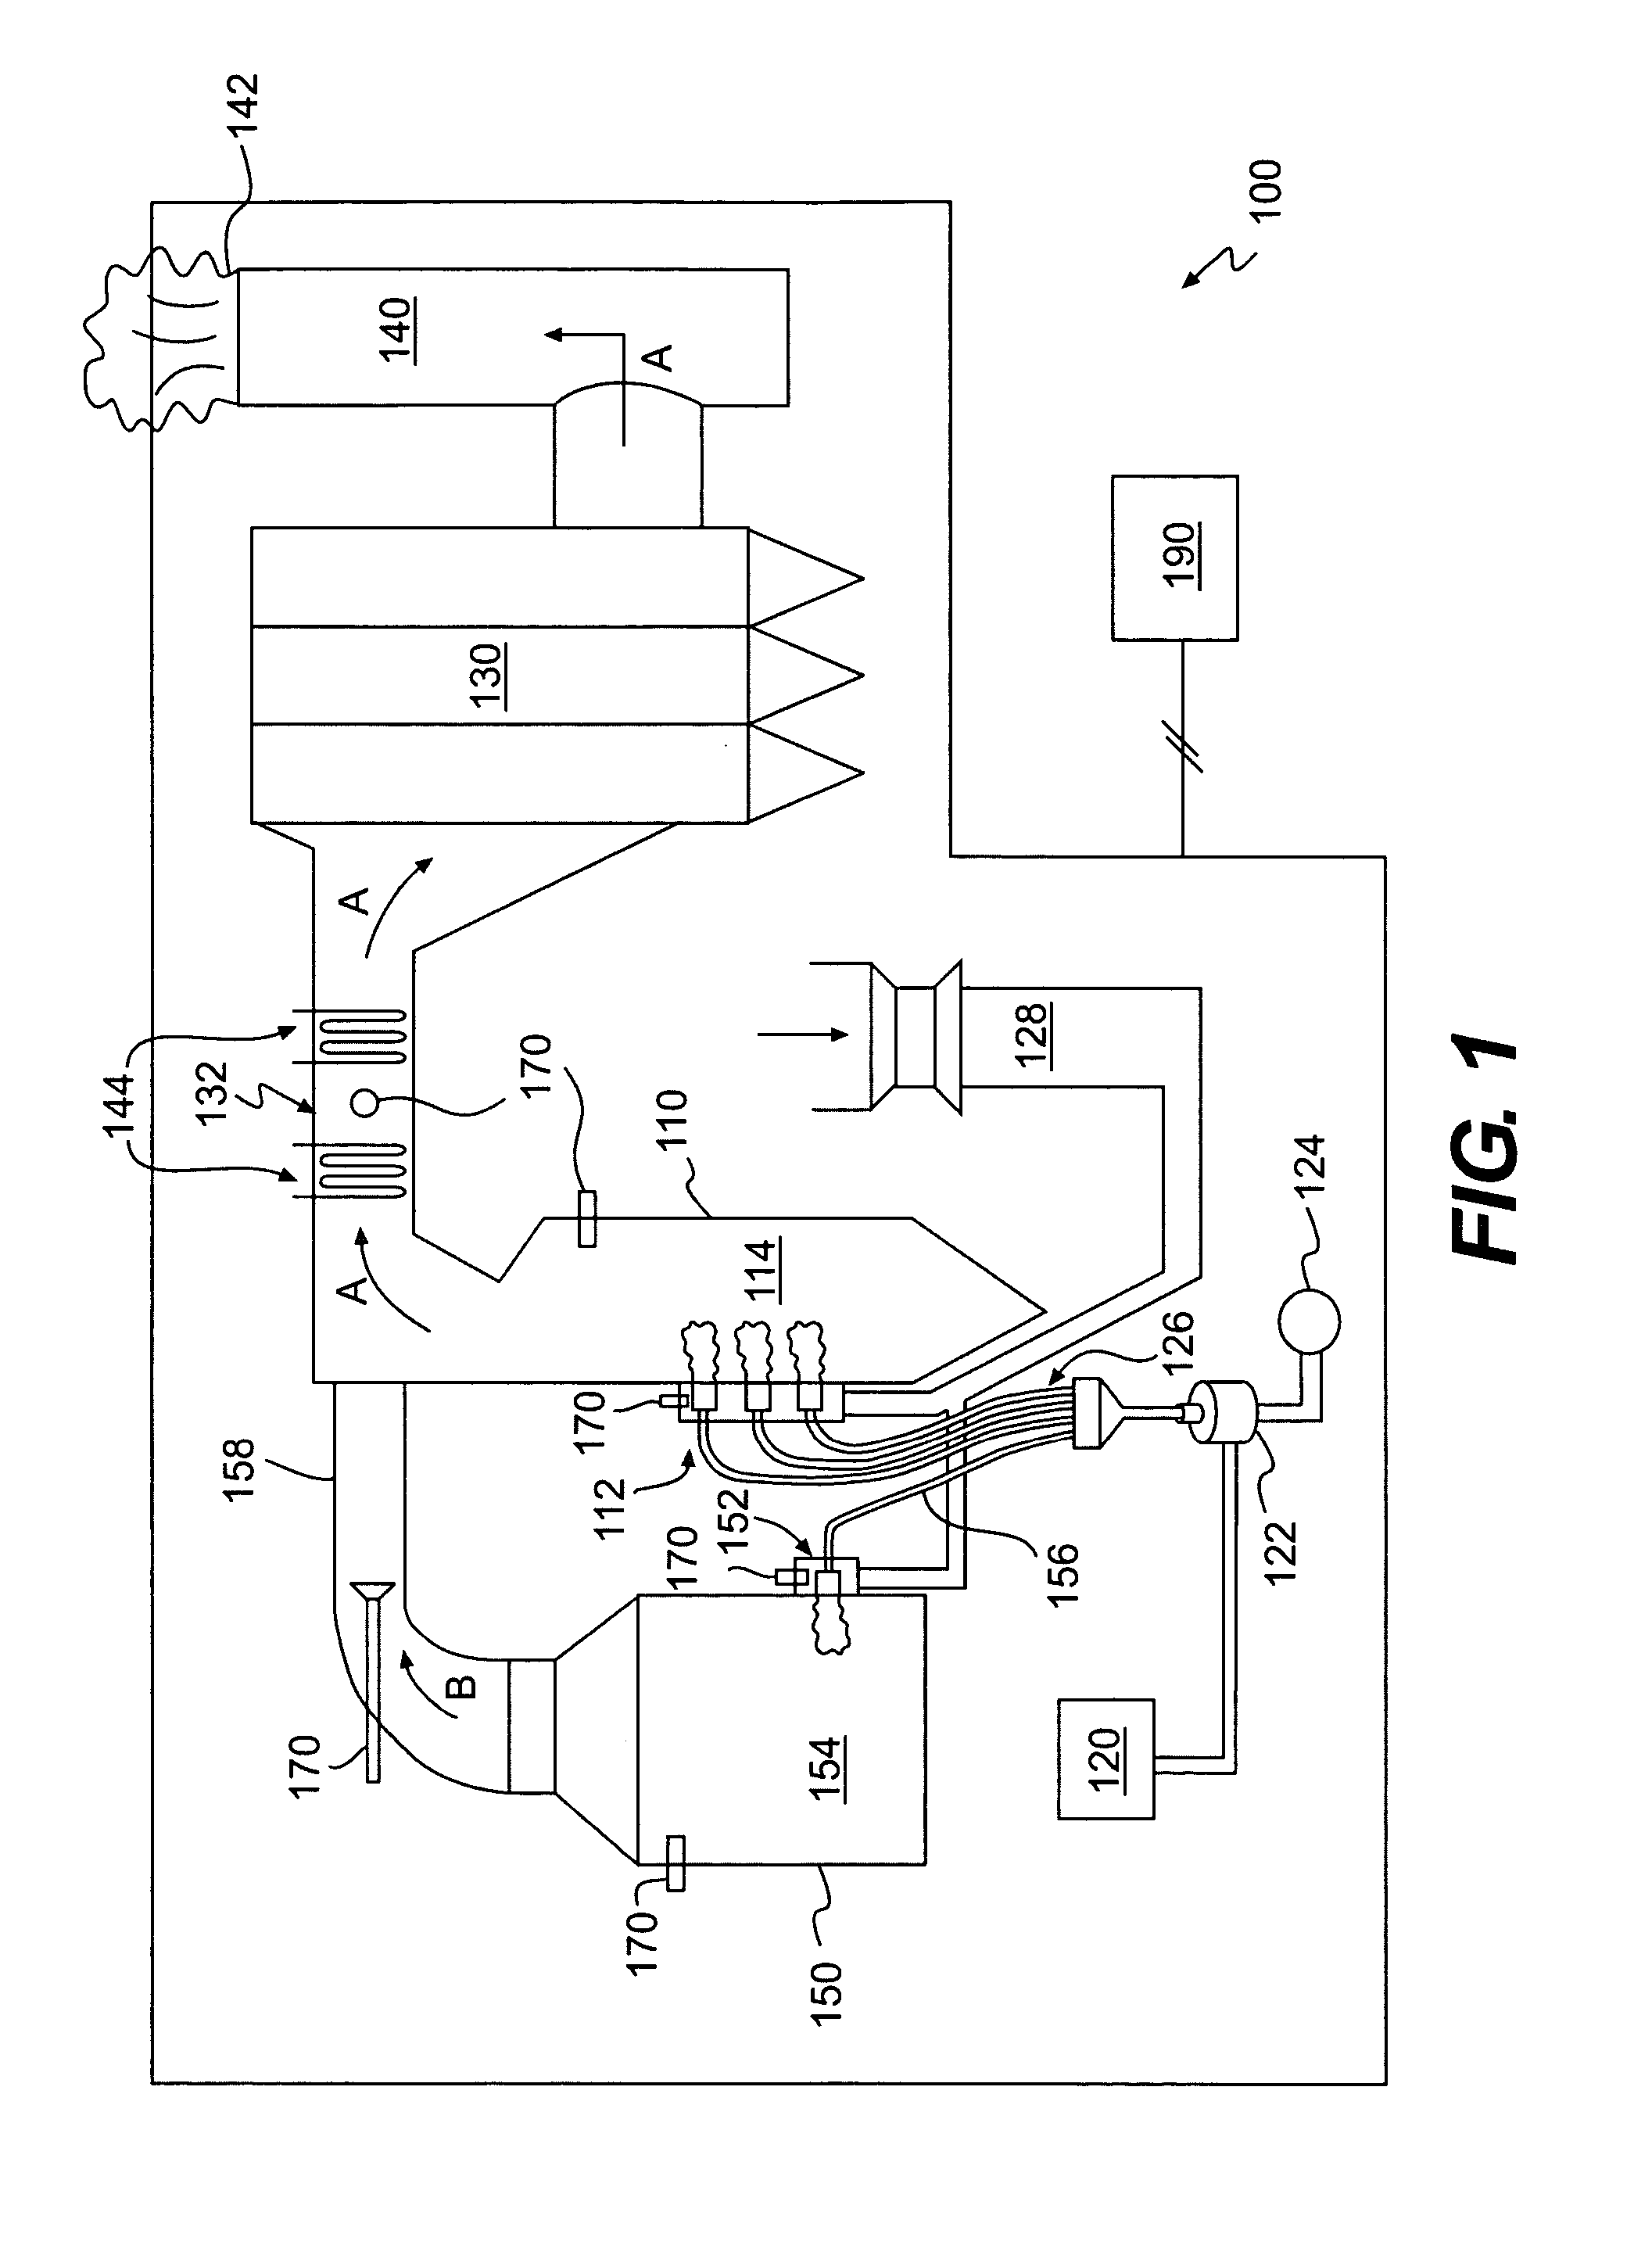 Methods and apparatuses for removing mercury-containing material from emissions of combustion devices, and flue gas and flyash resulting therefrom